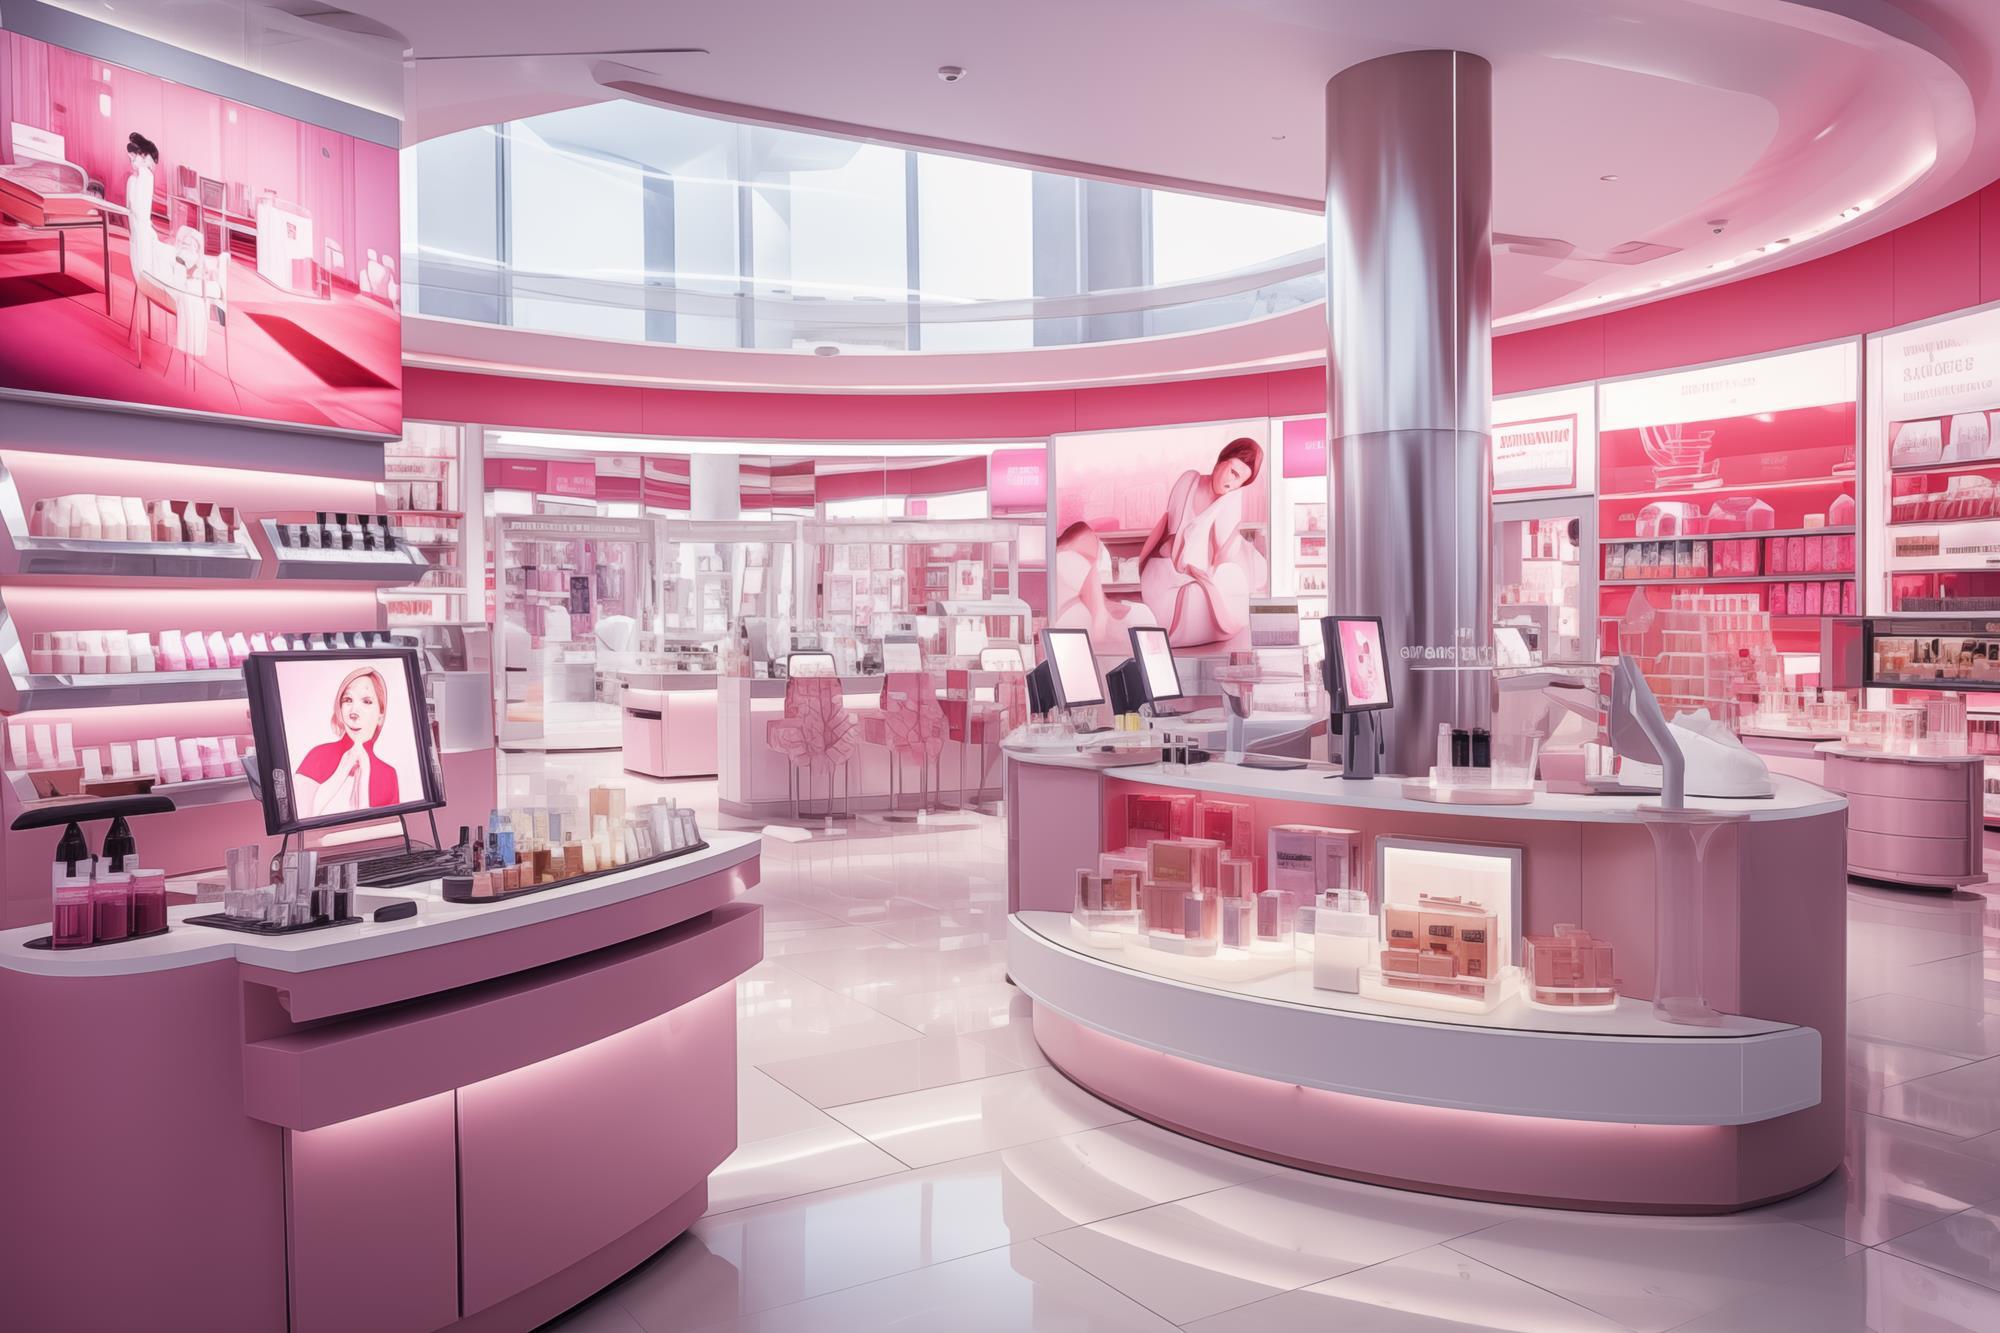 What might Avon's first-ever UK store look like?